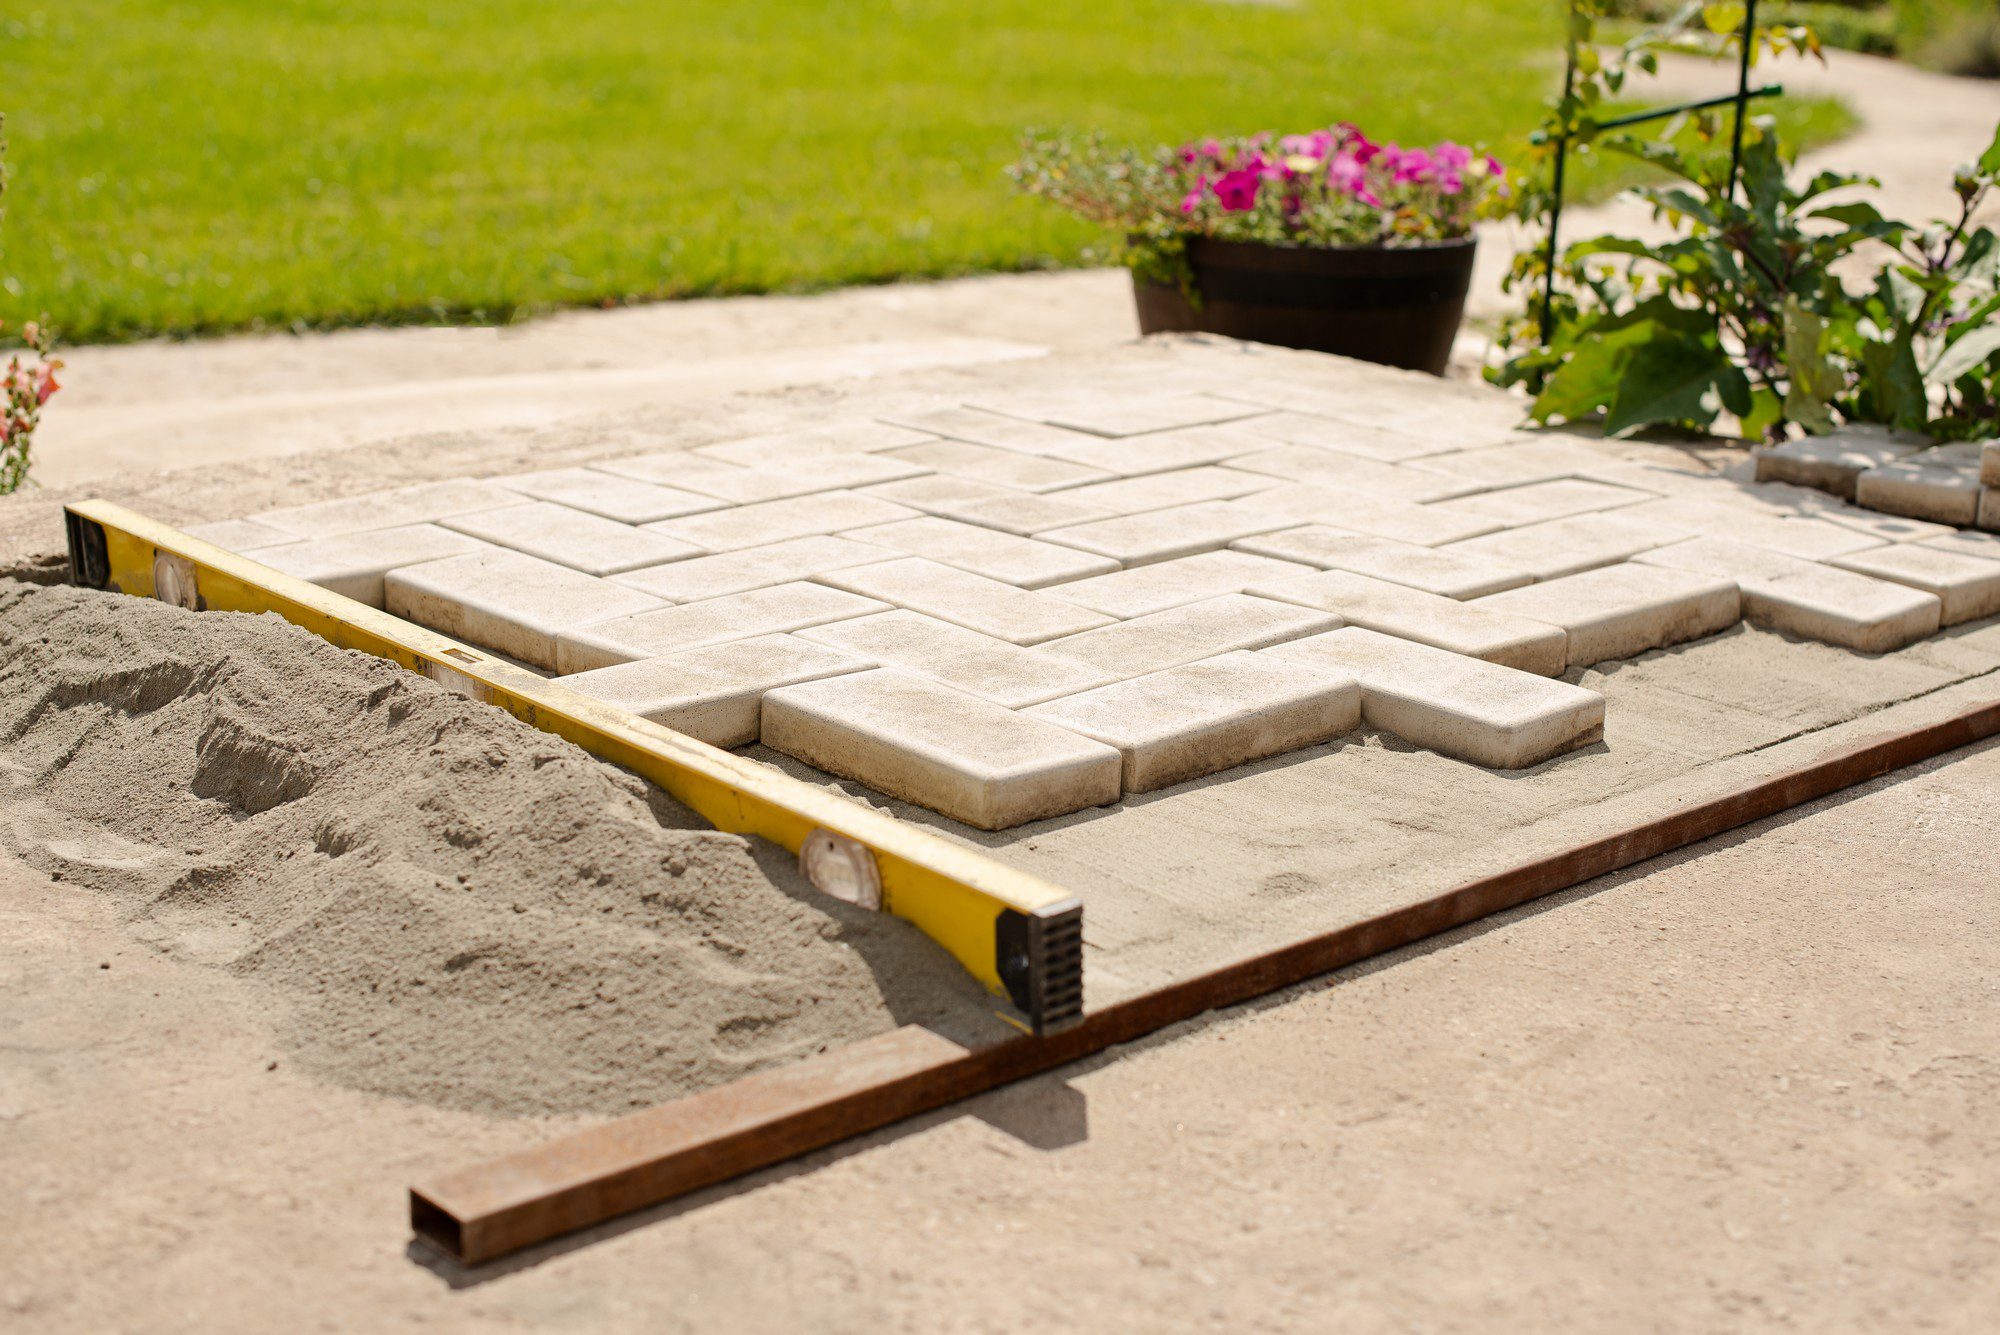 The image displays the process of laying paving stones to create a patio or pathway. We can see that the work is in progress, with concrete pavers neatly arranged in a pattern on a bed of leveling sand. Some pavers at the edge are yet to be placed. A yellow construction level is placed on top of the pavers to ensure that they are laid out flat and even. Along the perimeter, there are wooden or metal borders presumably used as guides for alignment. In the background, there's a container with flowering plants and a green lawn, indicating that this is a residential outdoor setting.